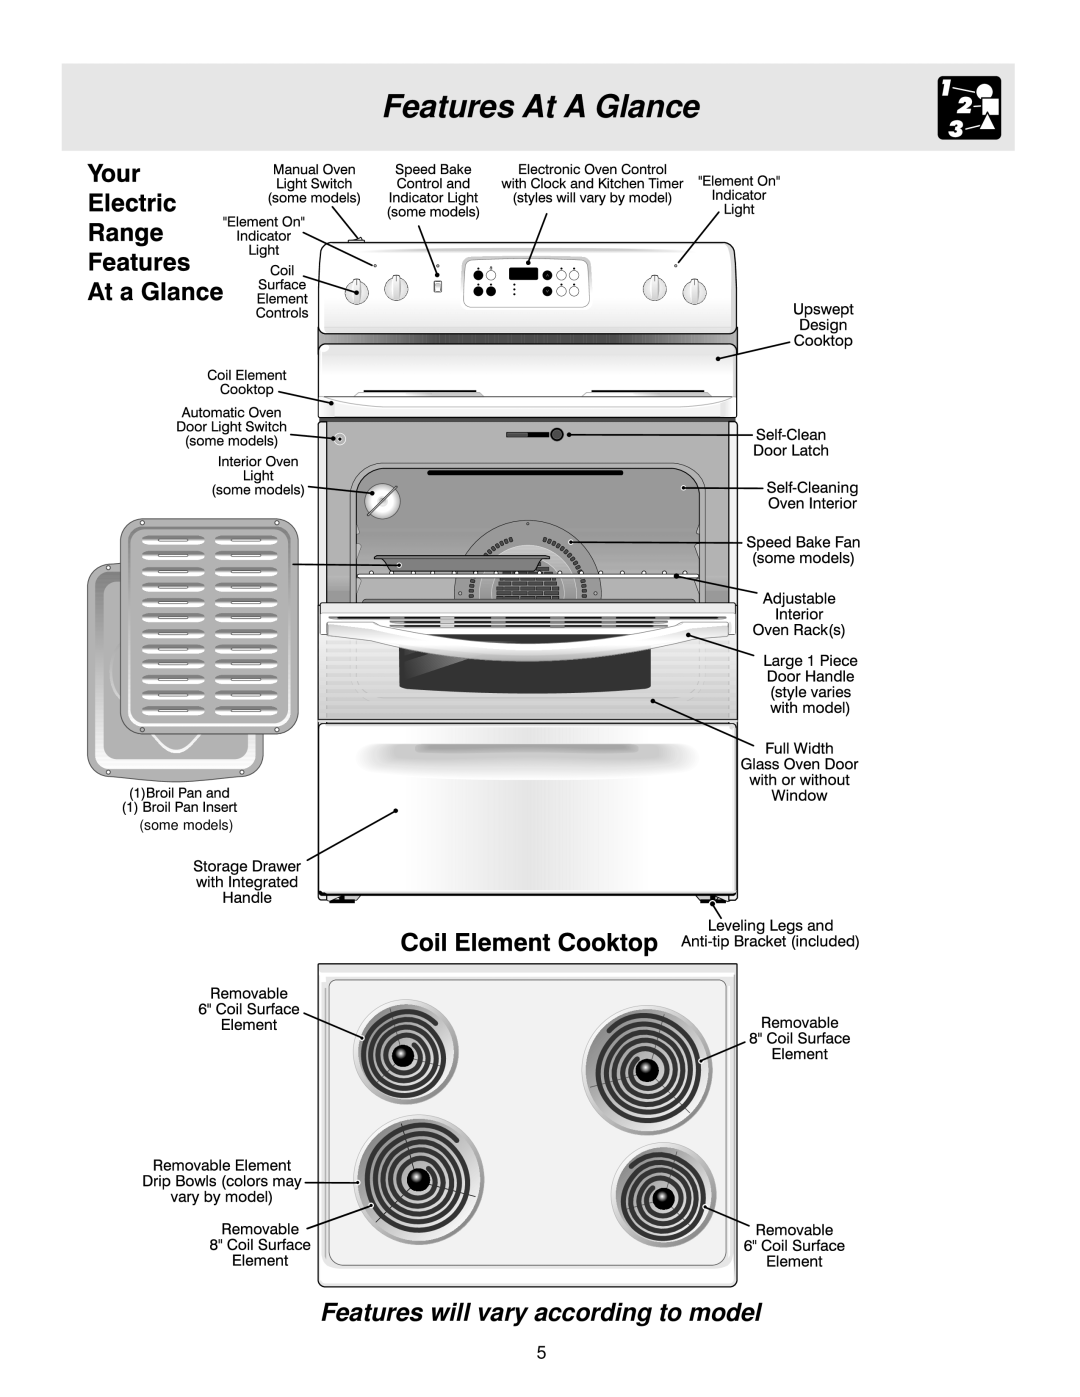 White-Westinghouse ES200/300 manual Features At A Glance, Features will vary according to model 